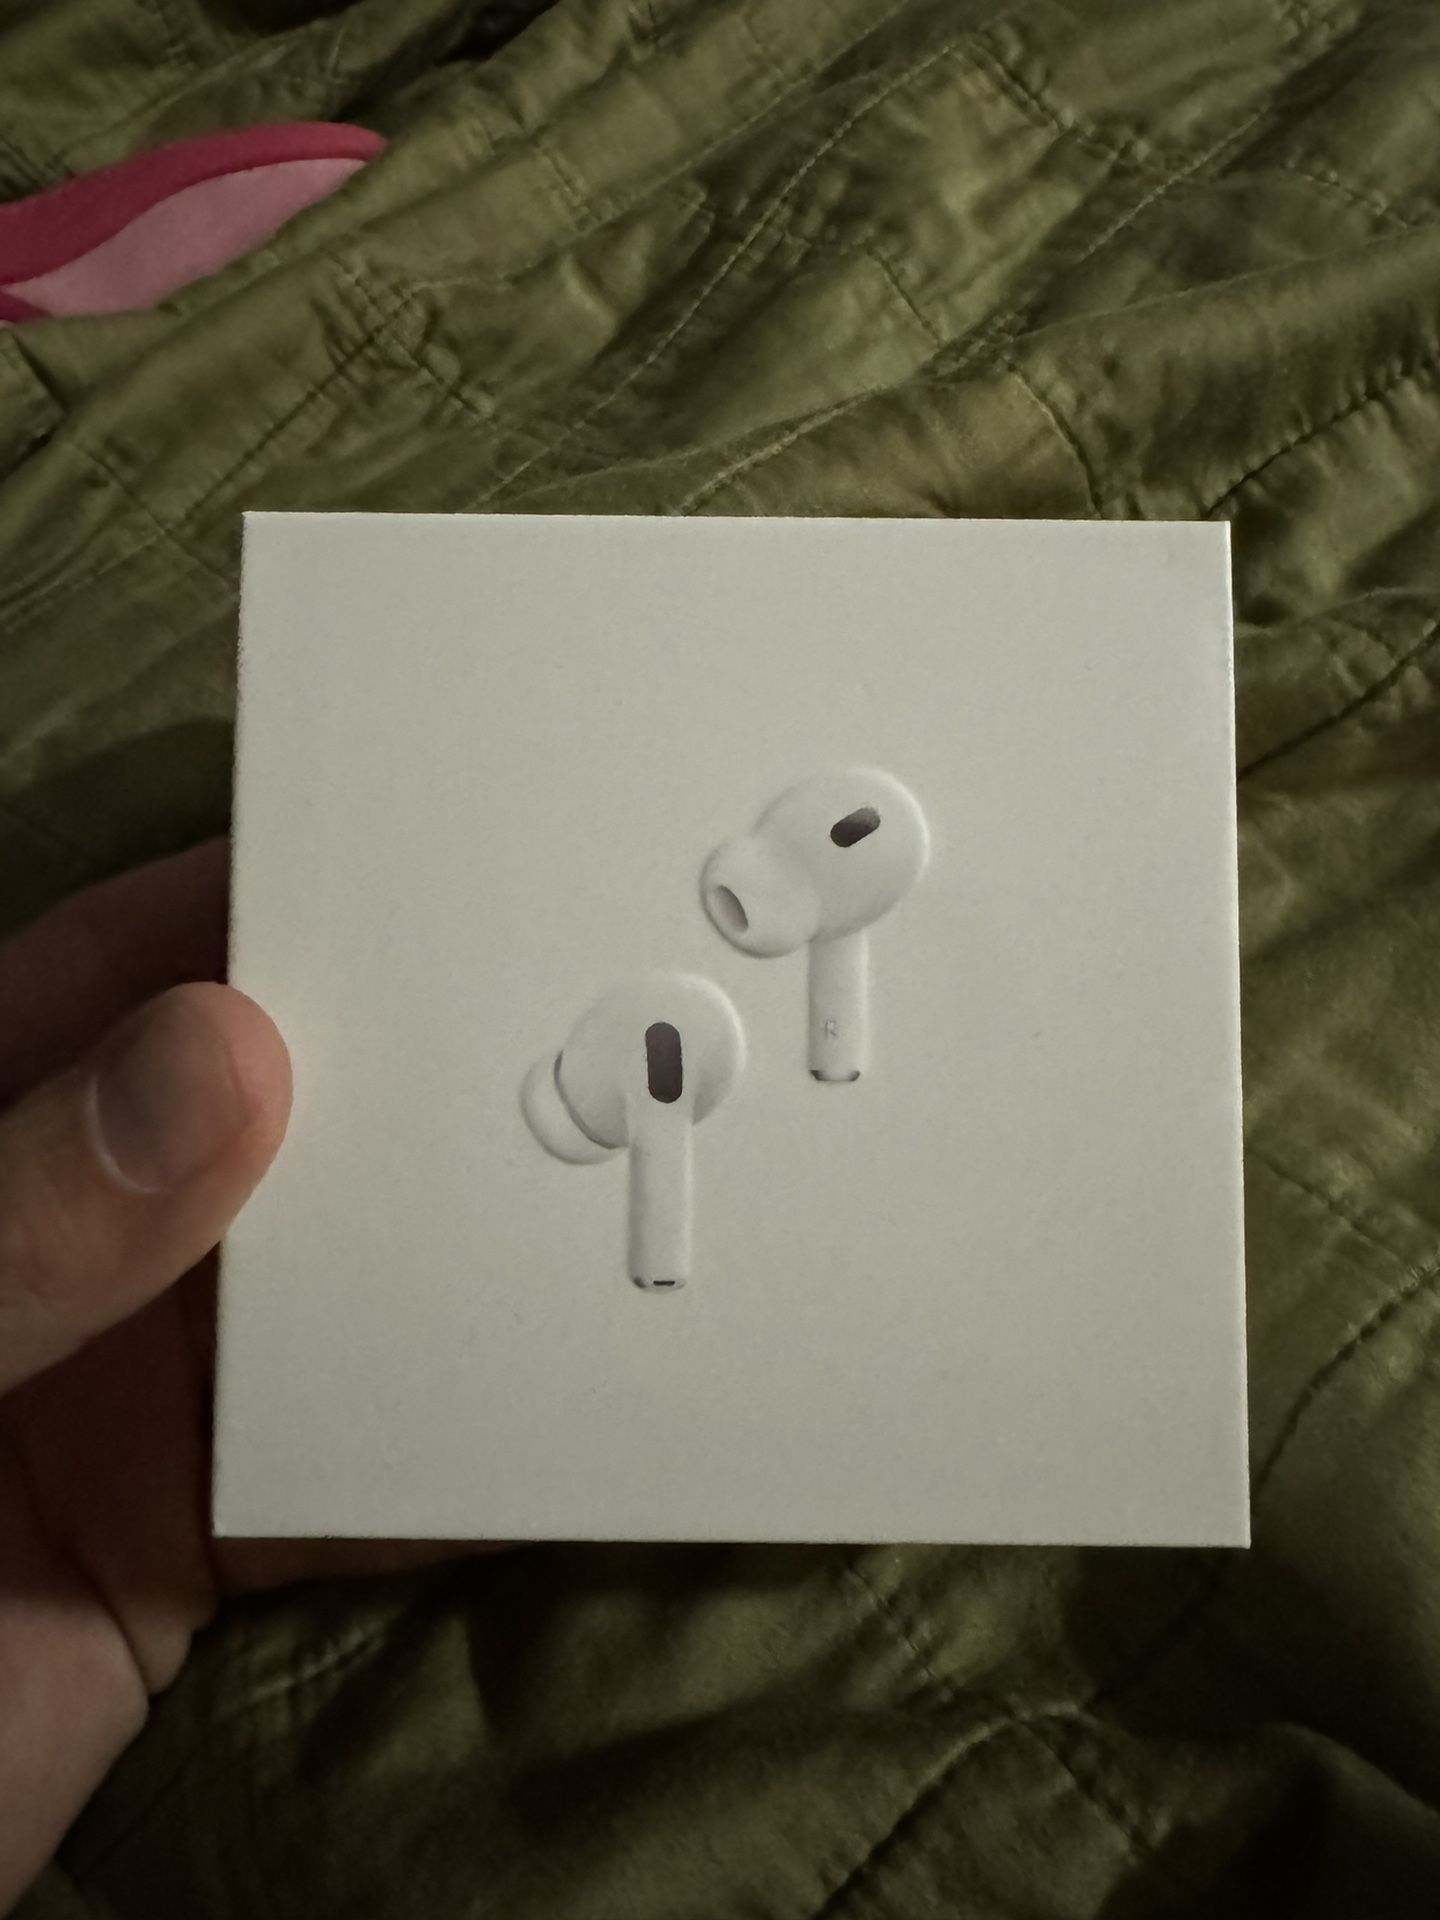 AirPods Pro 2nd Generation.